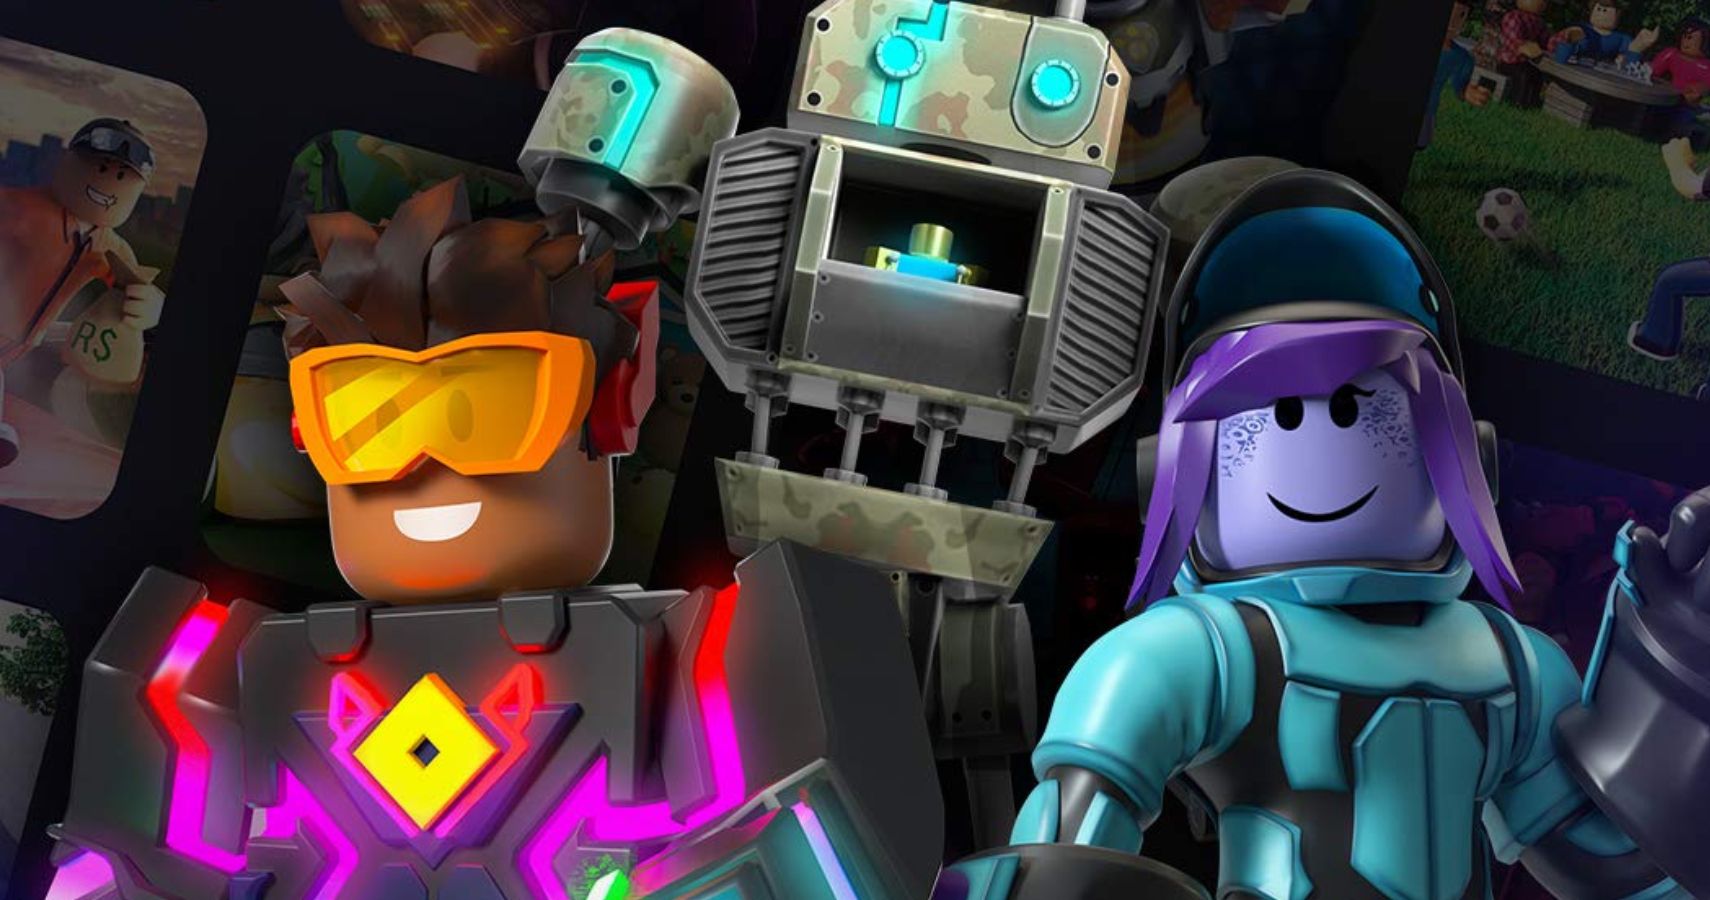 Prime Gaming S First New Benefit Is Exclusive Roblox Content - the cbr roblox